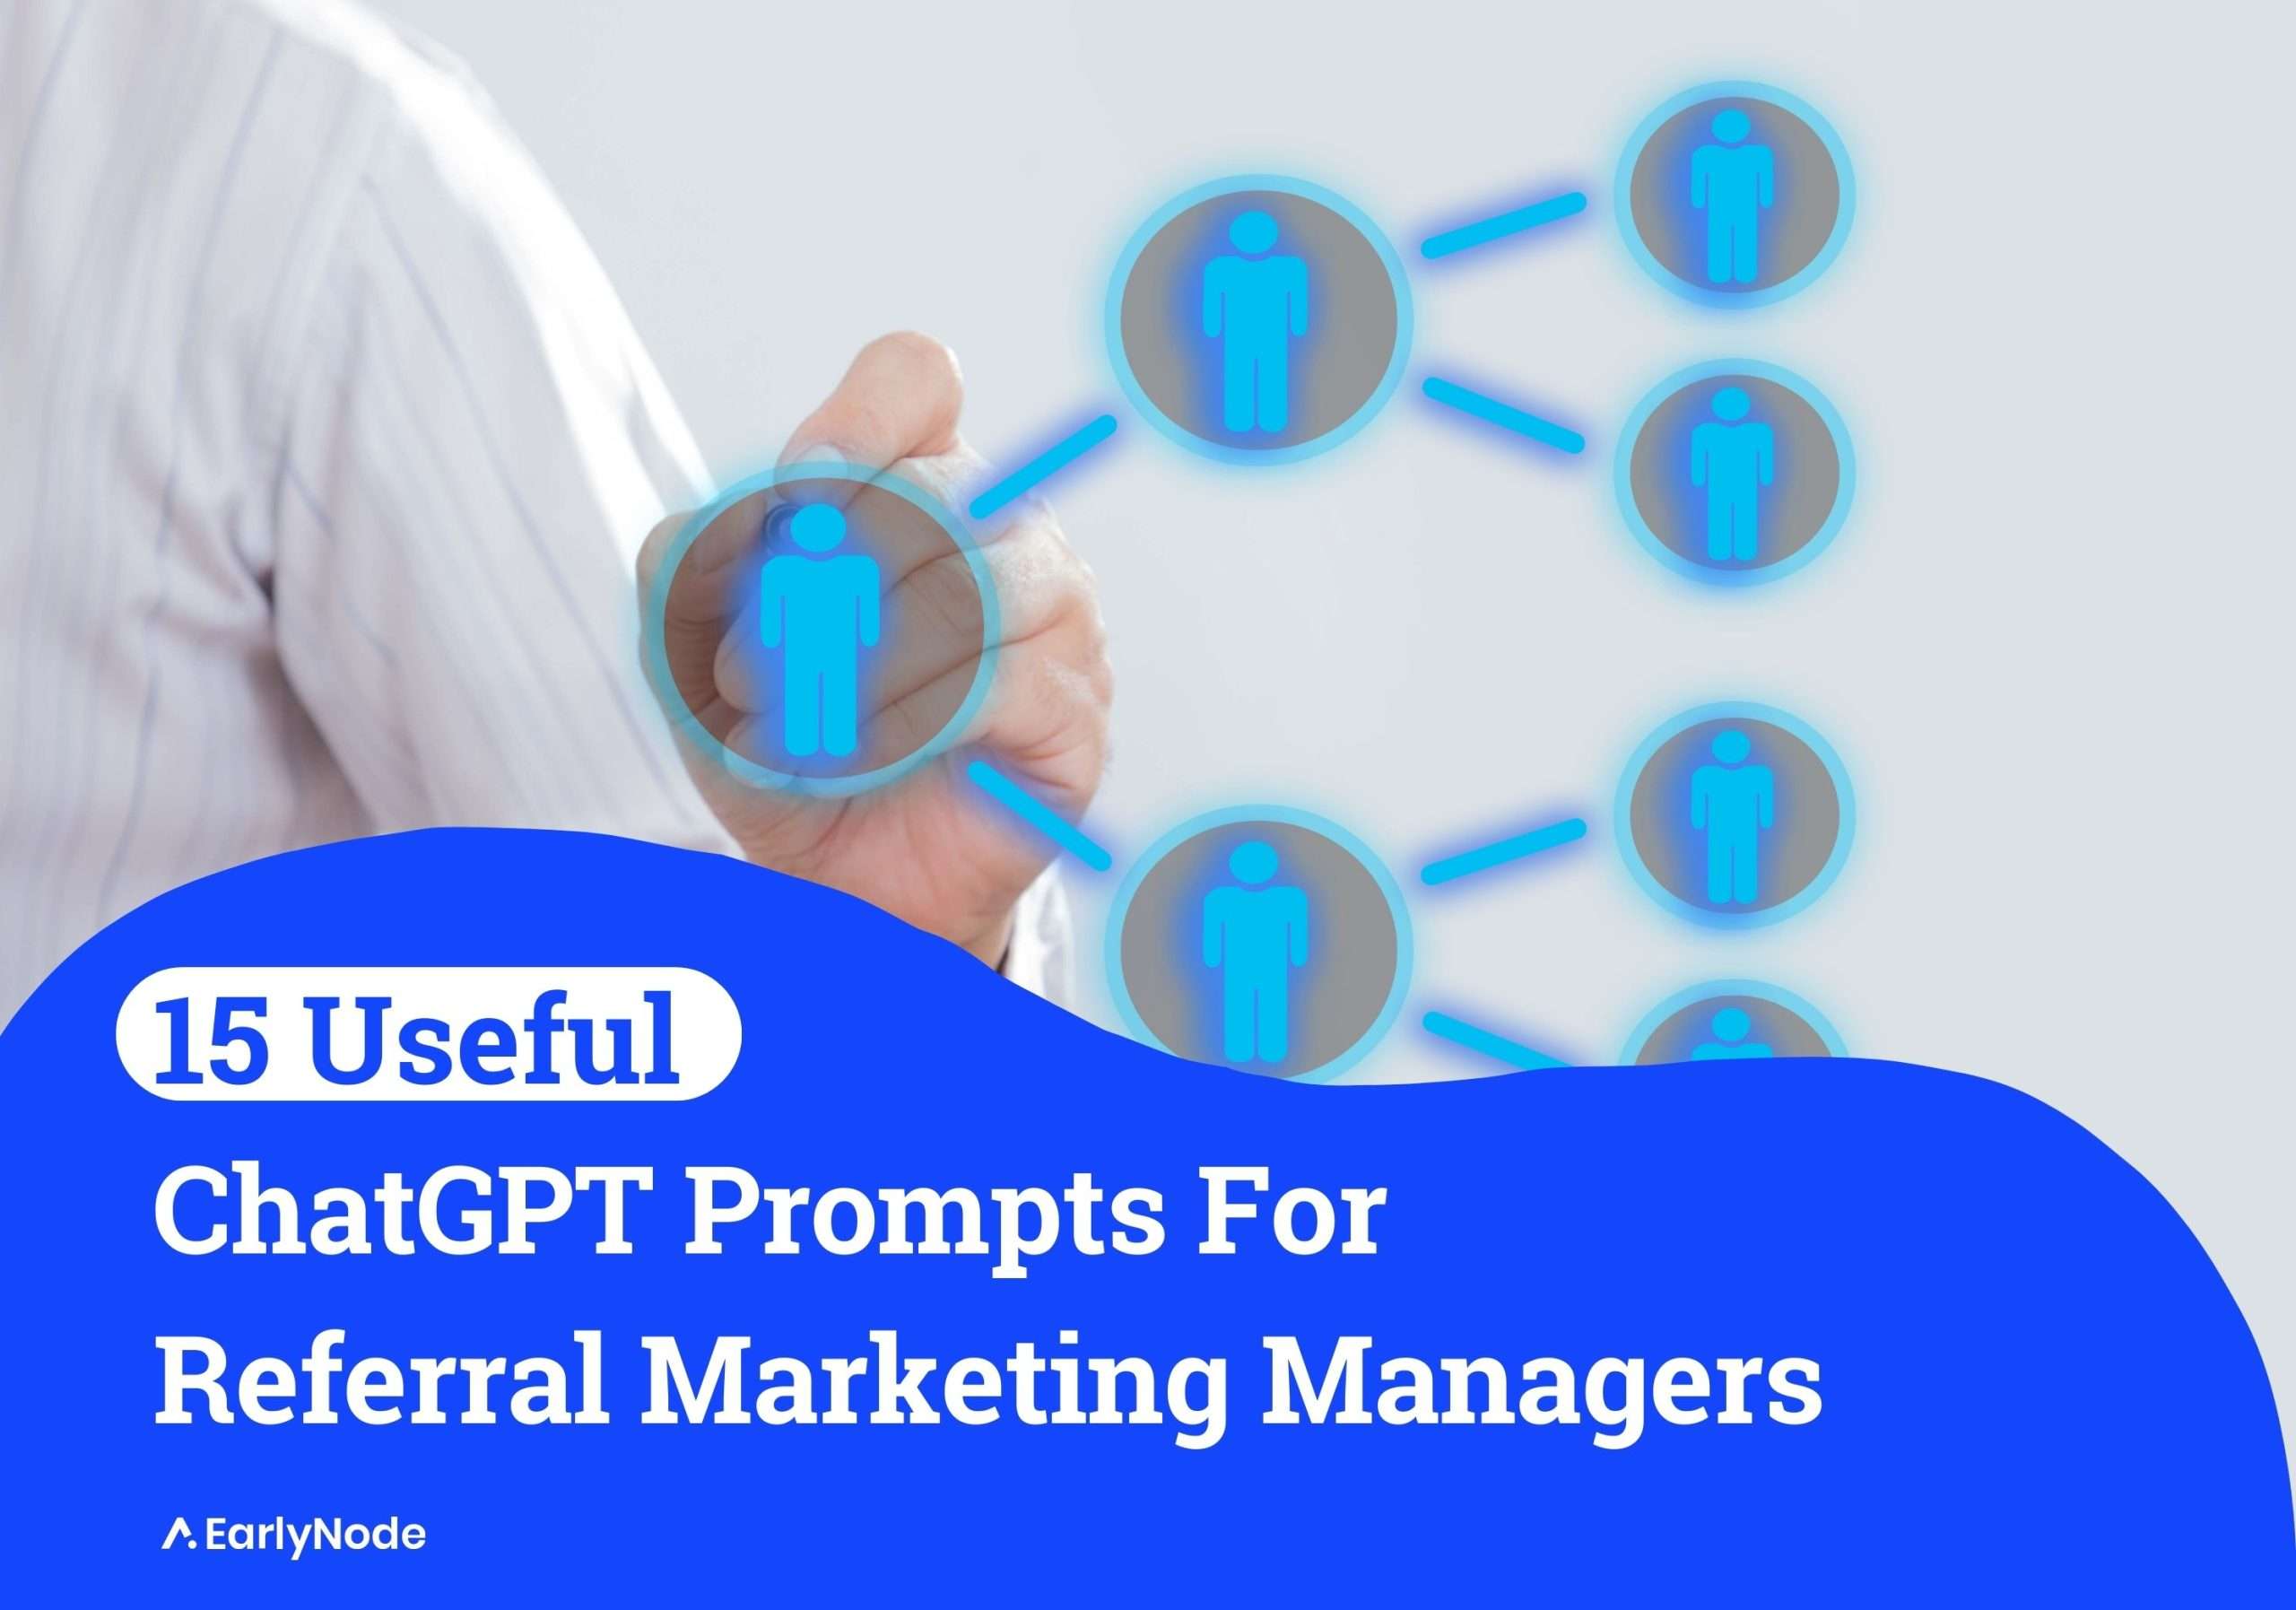 15+ ChatGPT Prompts for Referral Marketing Managers